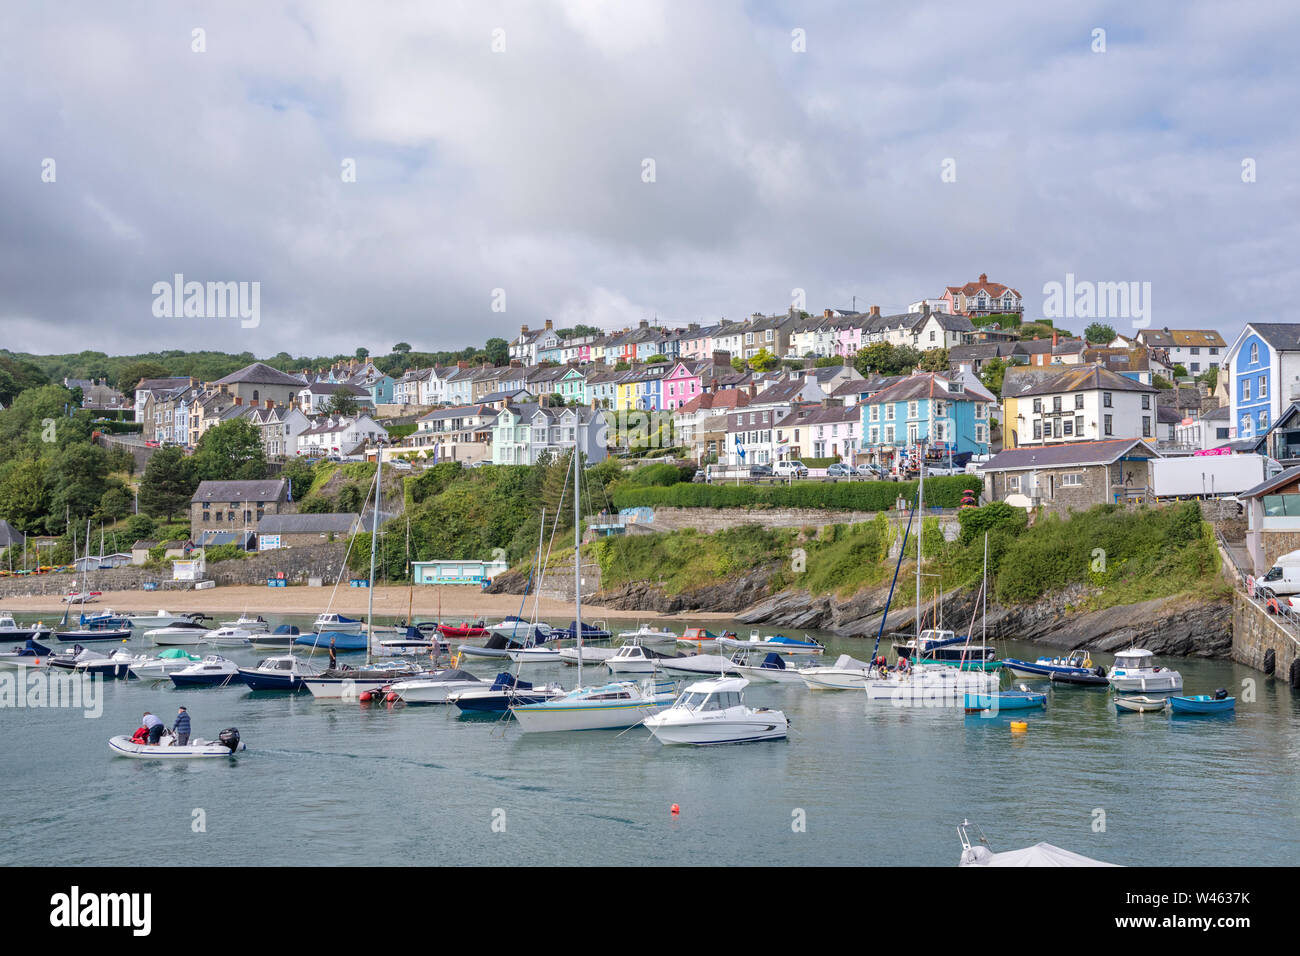 The popular seaside town of New Quay, Ceredigion, Wales, UK Stock Photo